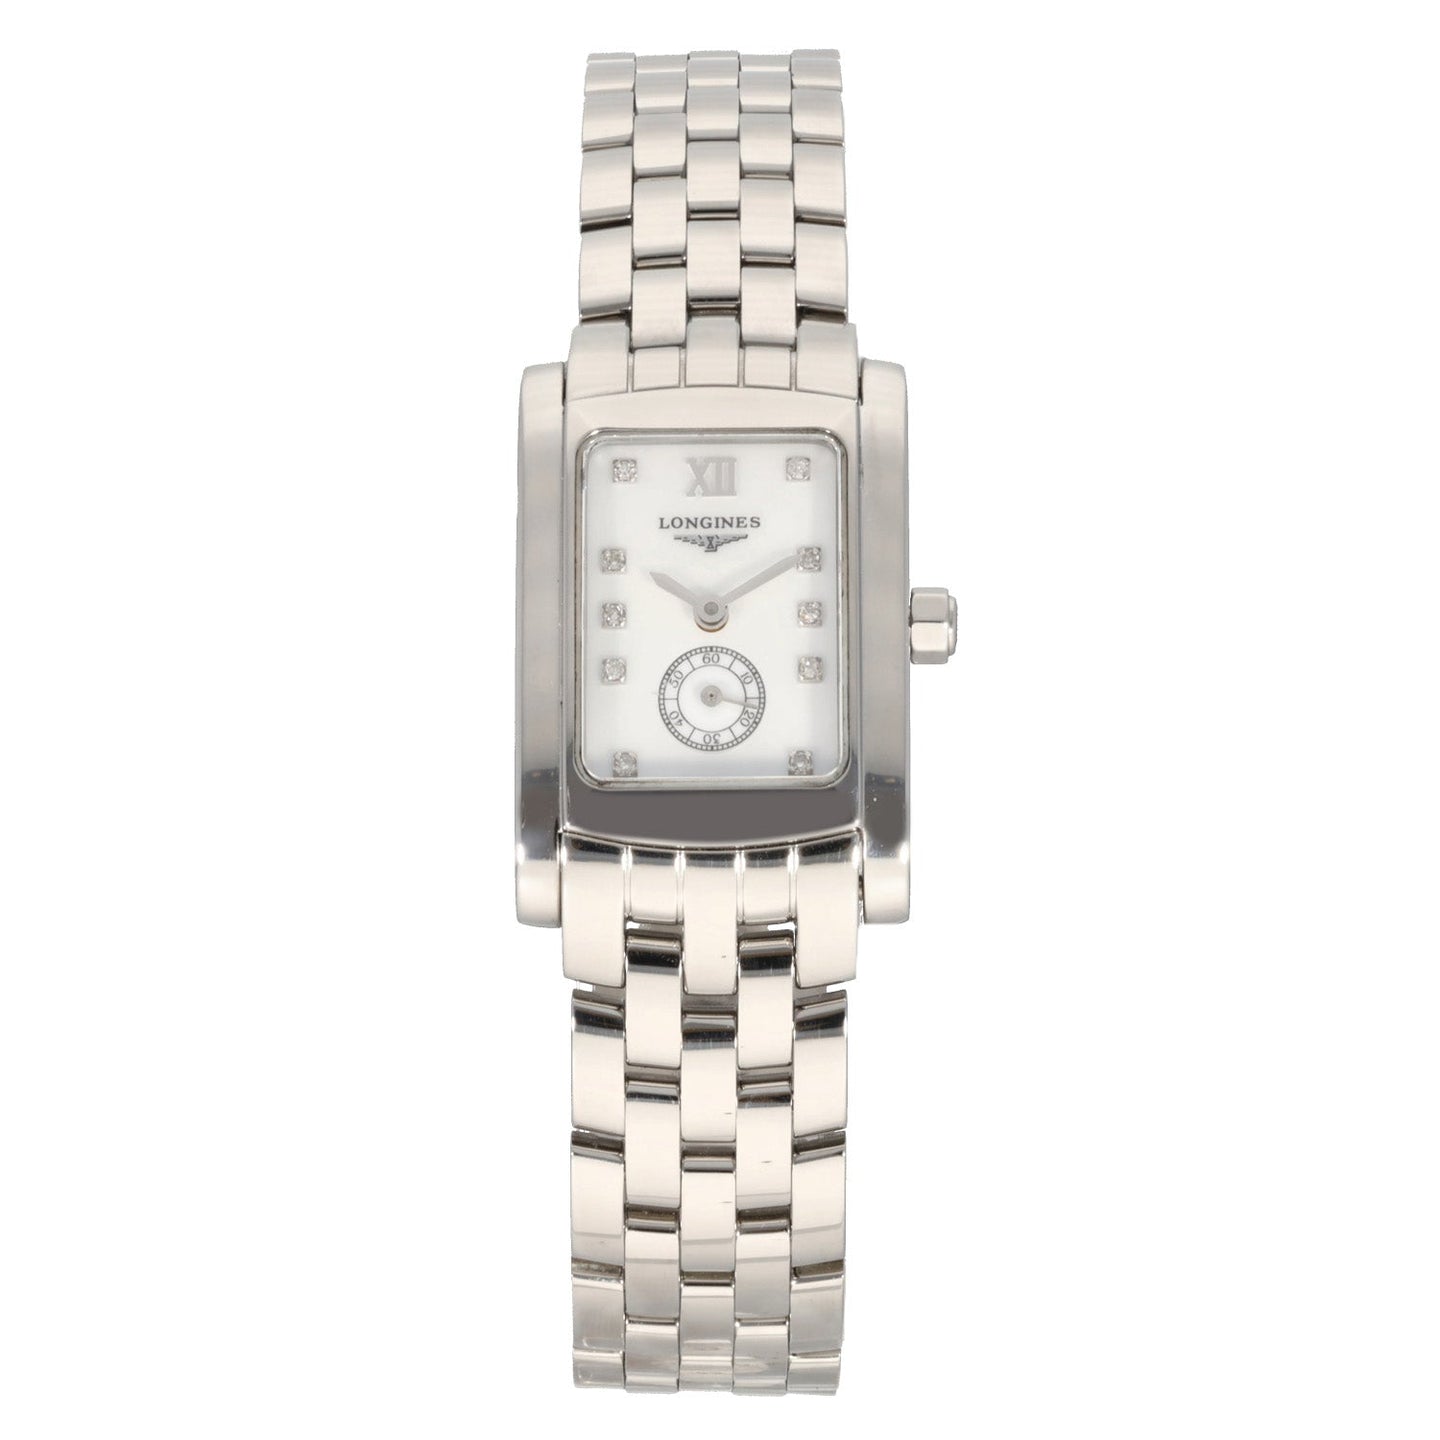 Longines DolceVita L5.155.4 19mm Stainless Steel Watch